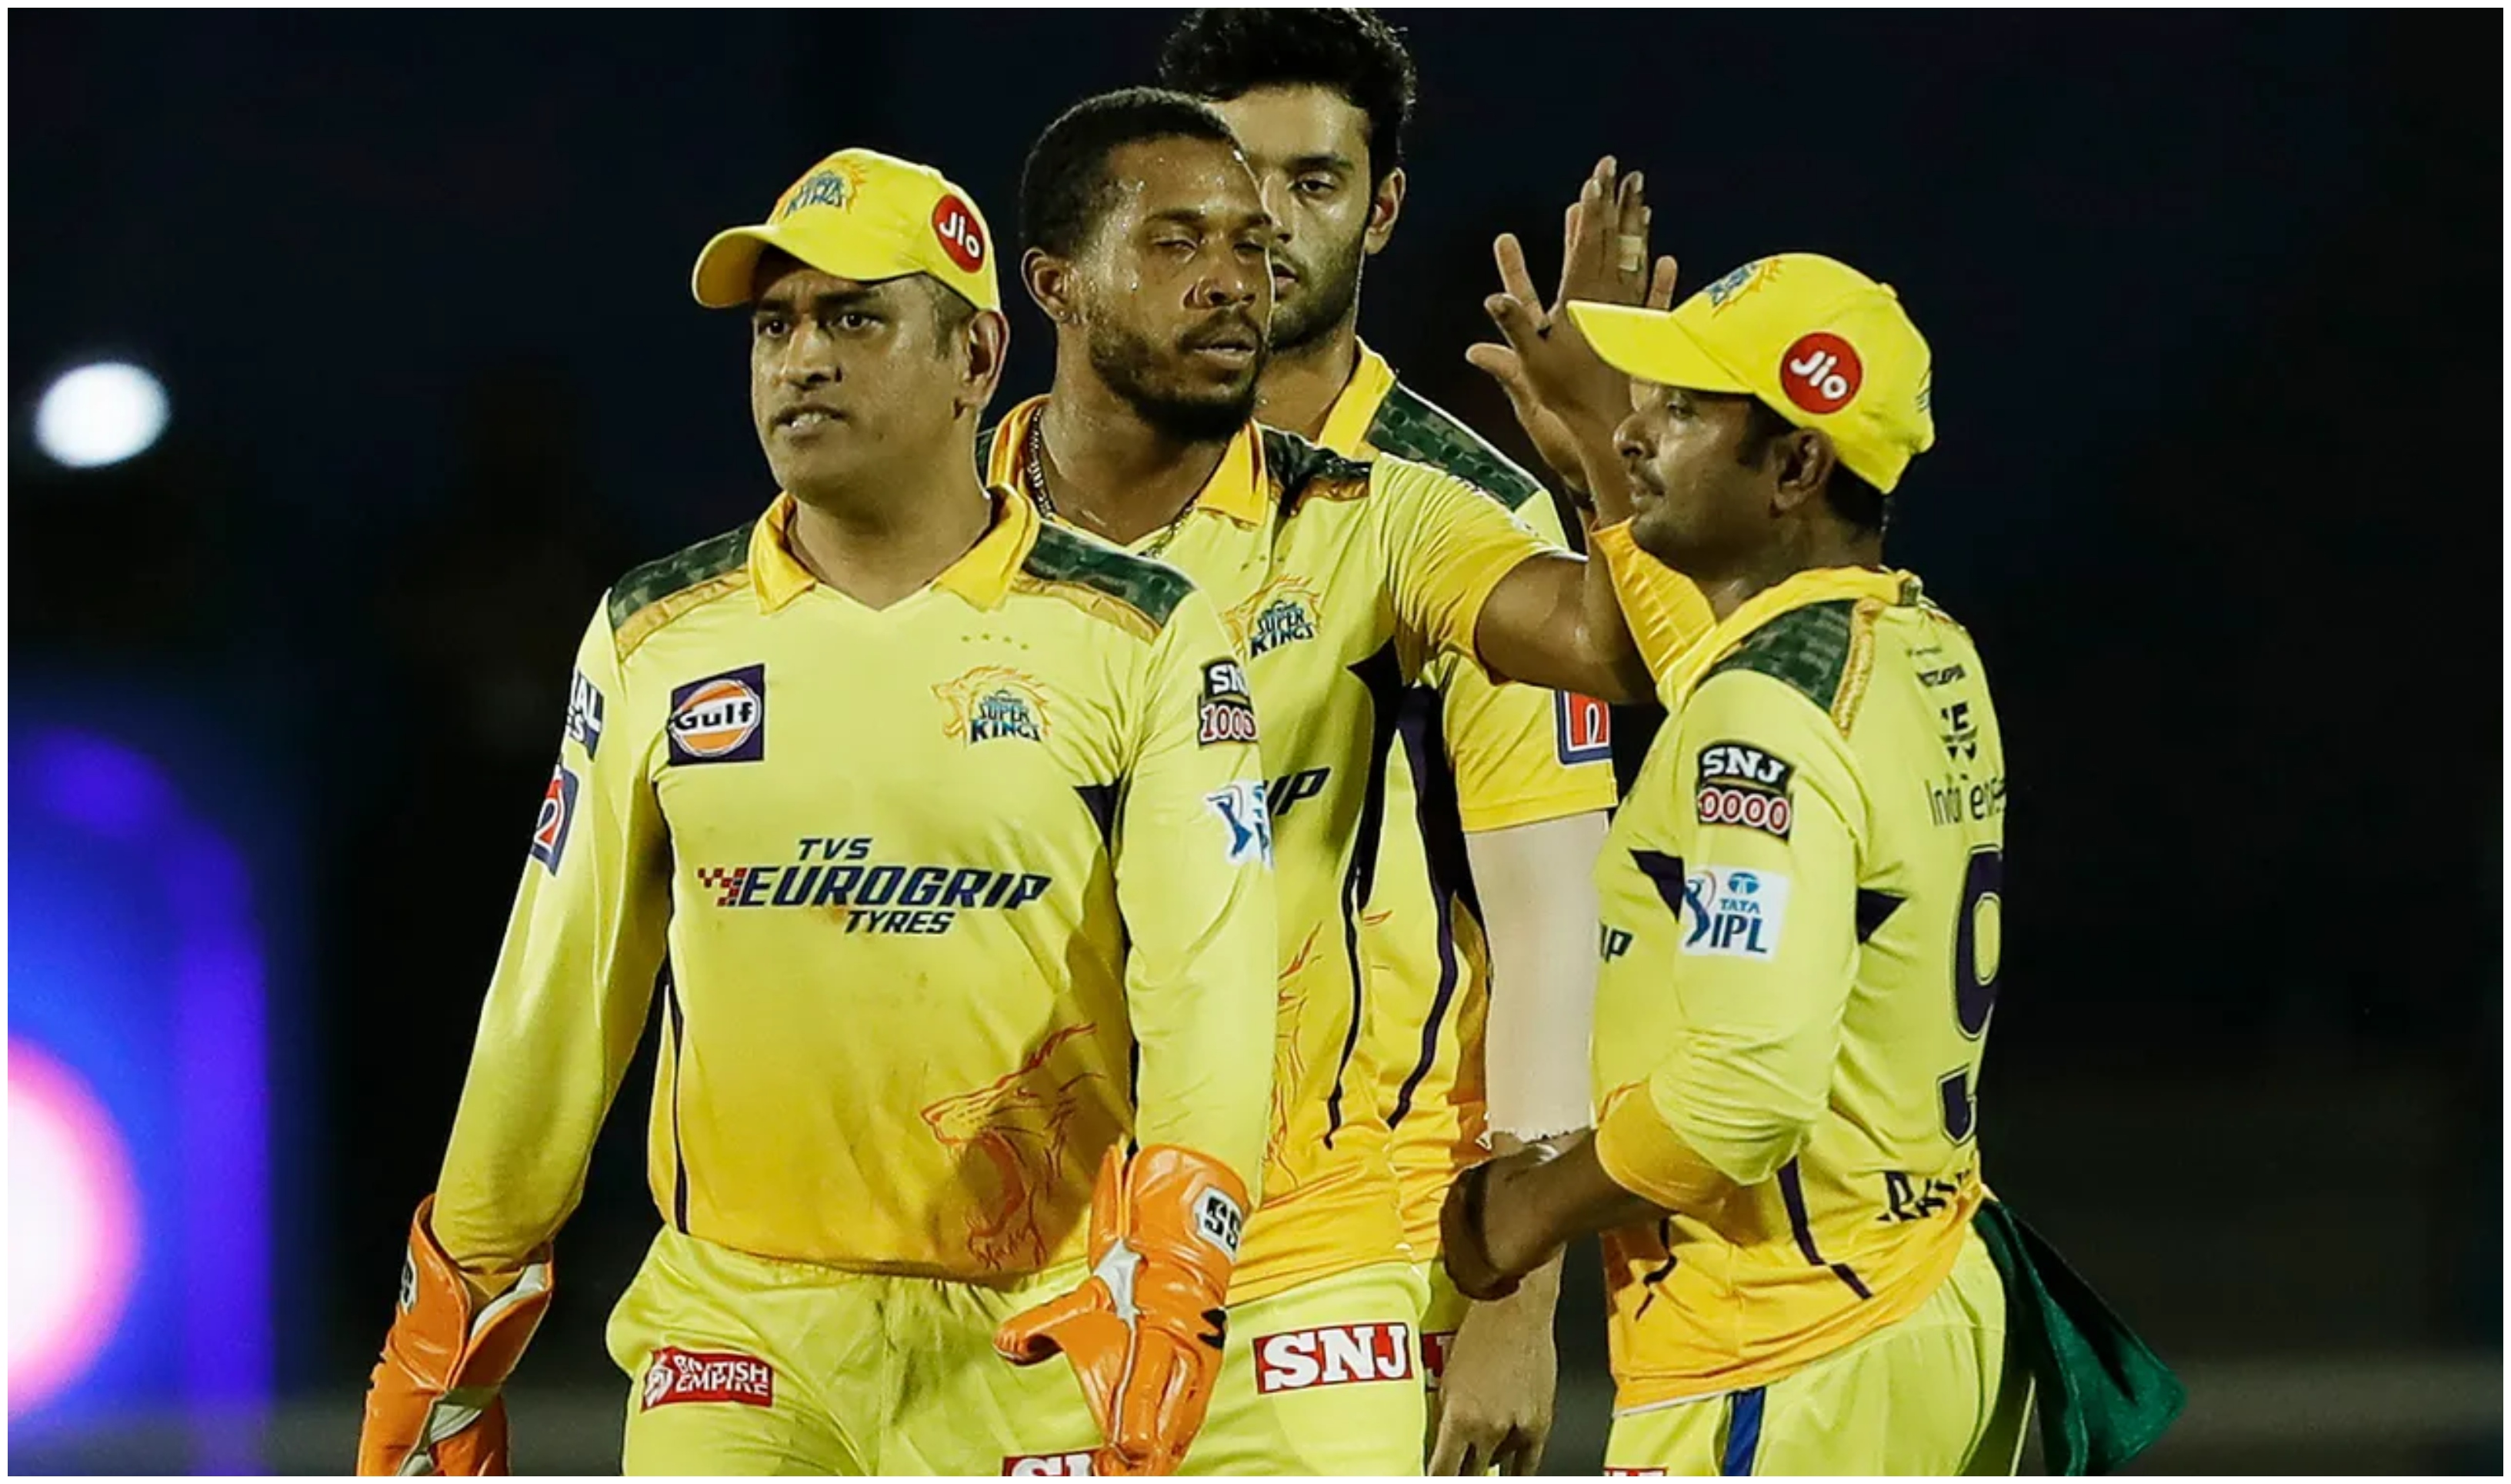 CSK are looking for their first win in the IPL 2022 season | BCCI/IPL